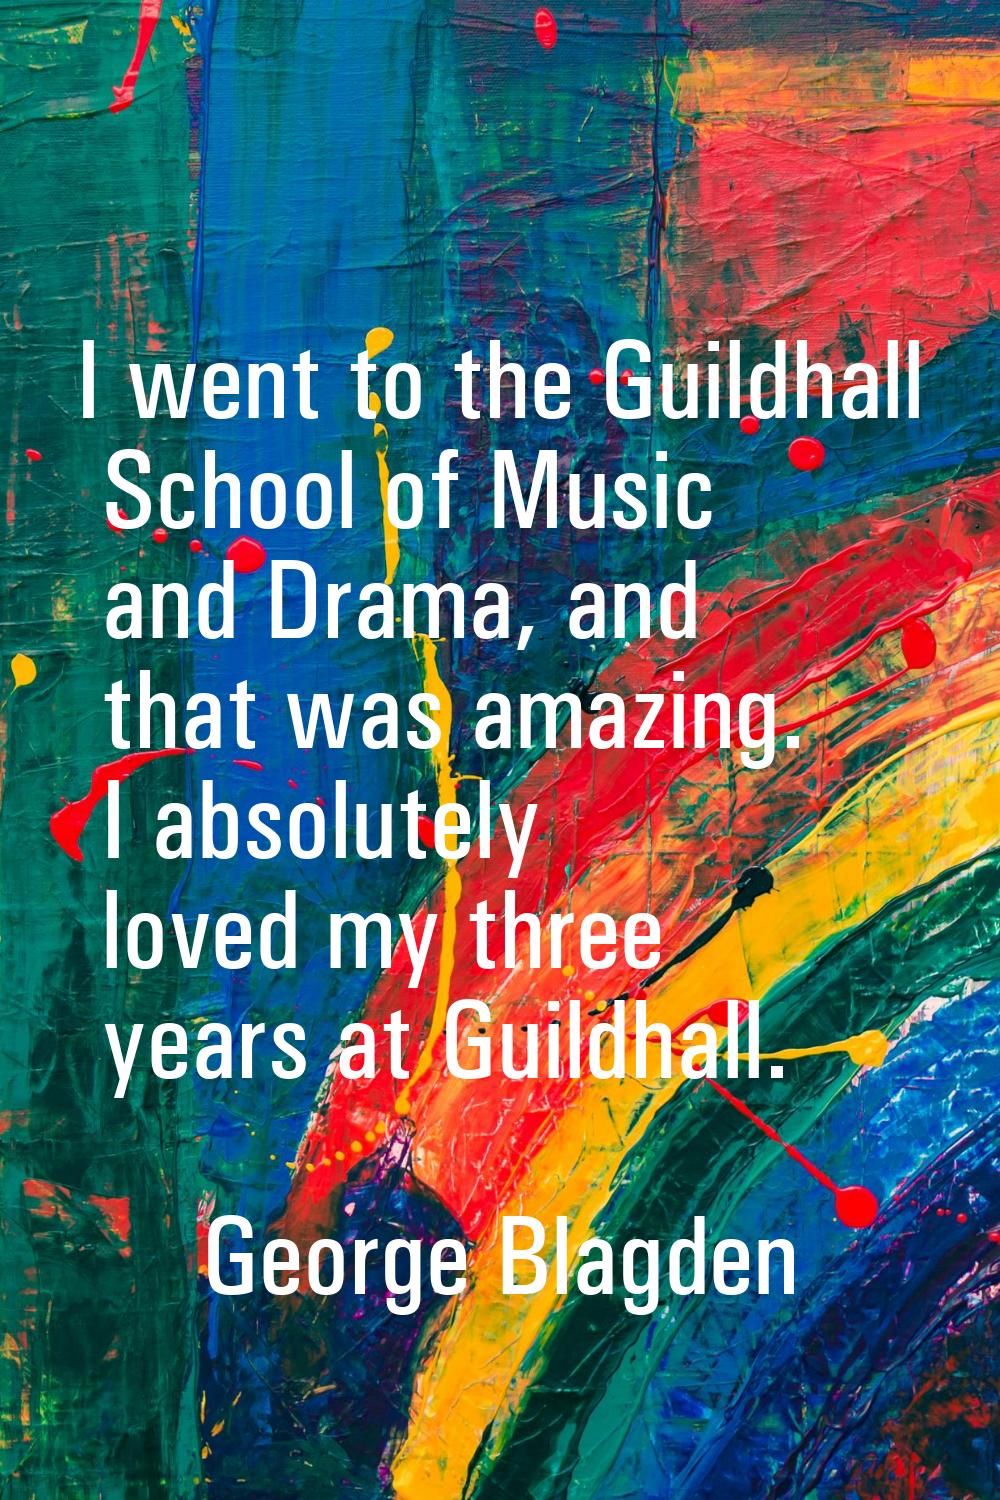 I went to the Guildhall School of Music and Drama, and that was amazing. I absolutely loved my thre